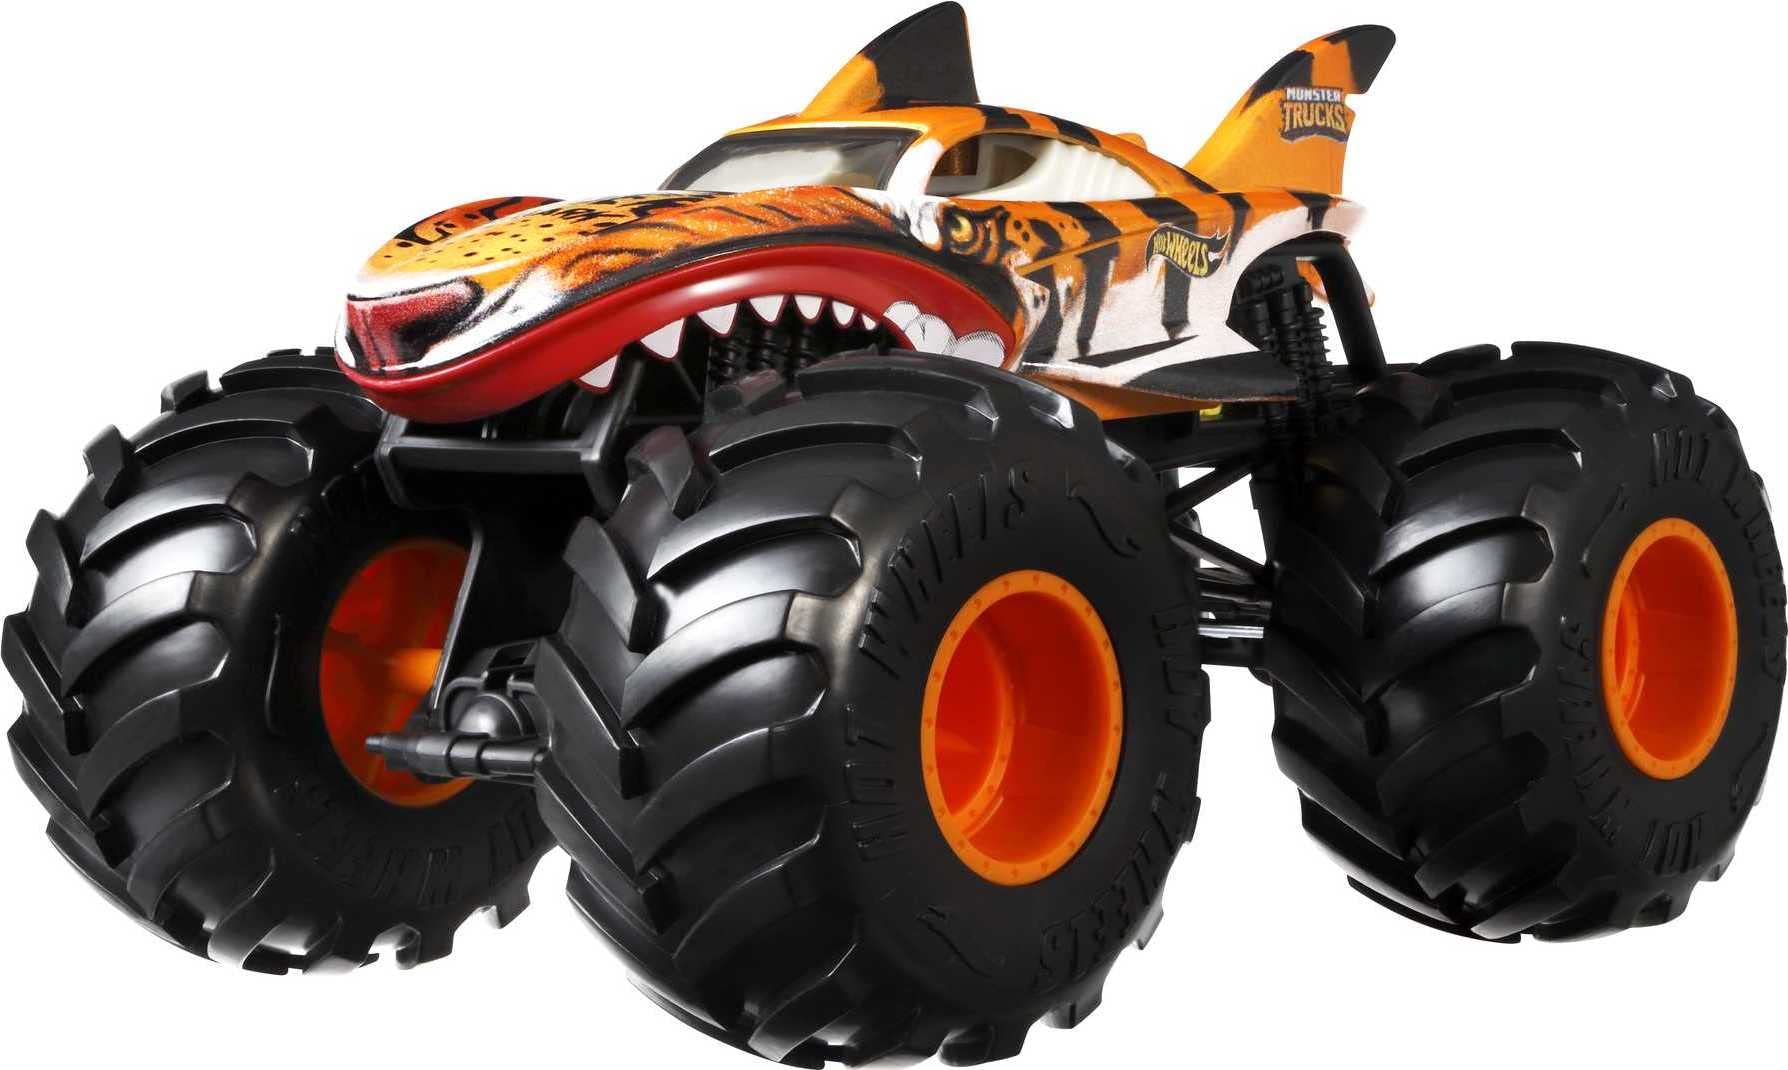 Hot Wheels Monster Trucks Oversized Tiger Shark 1:24 Scale Die-Cast Toy Truck $13 + Free Shipping w/ Prime or on $35+